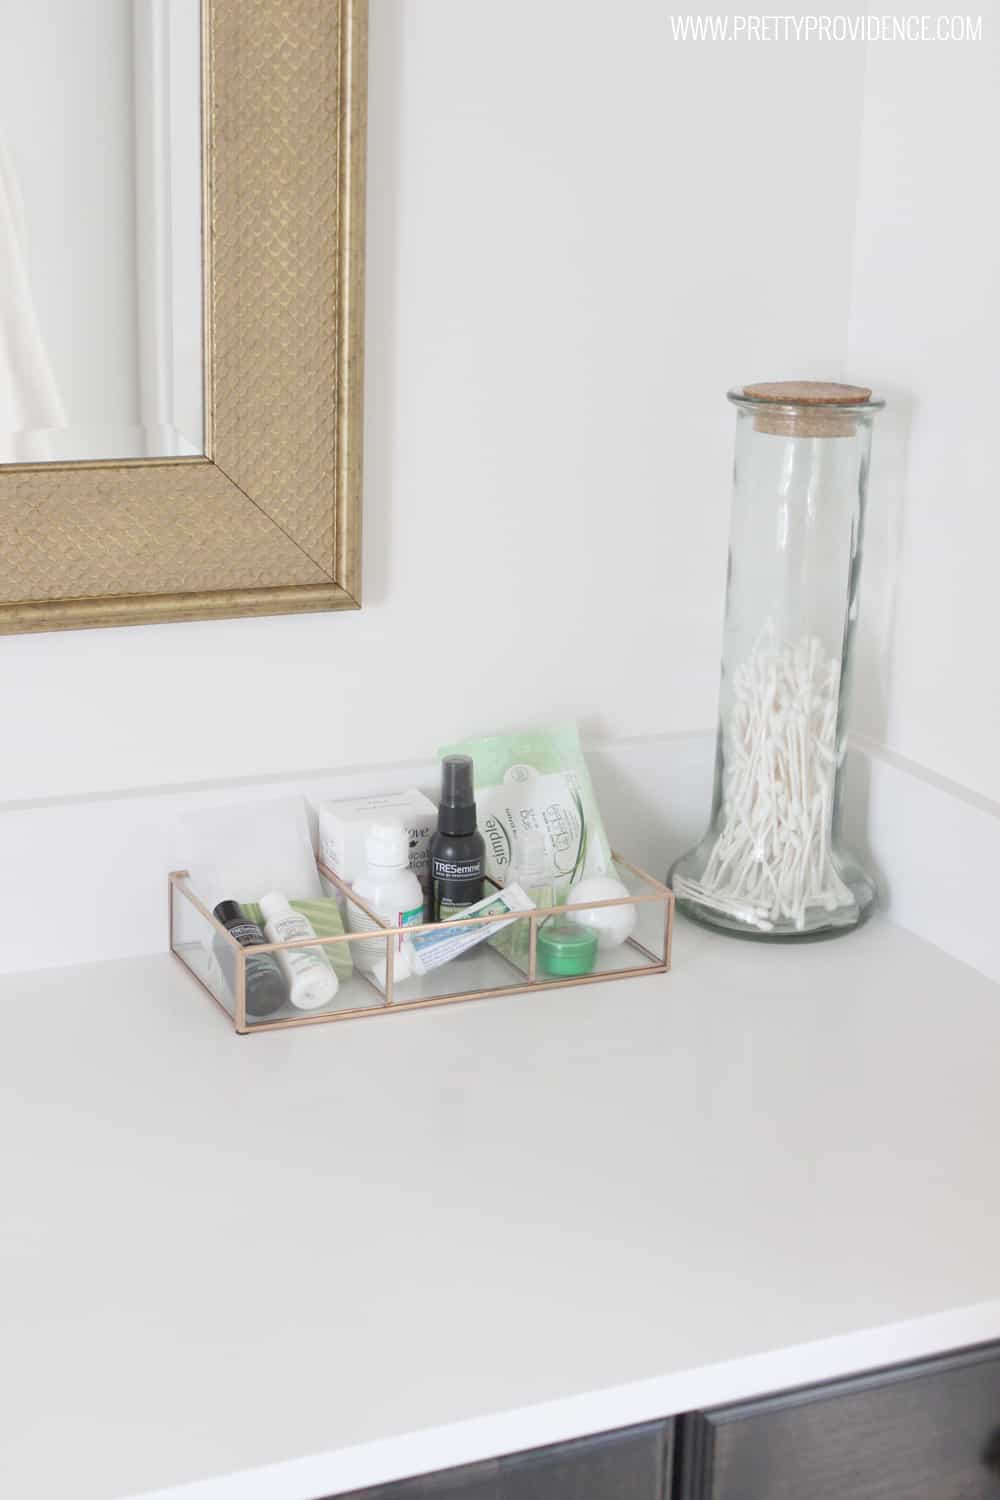 I am loving this guest bathroom! Especially love the little touches she did to make the guests feel welcome and comfortable! So simple, but it goes a long way! 